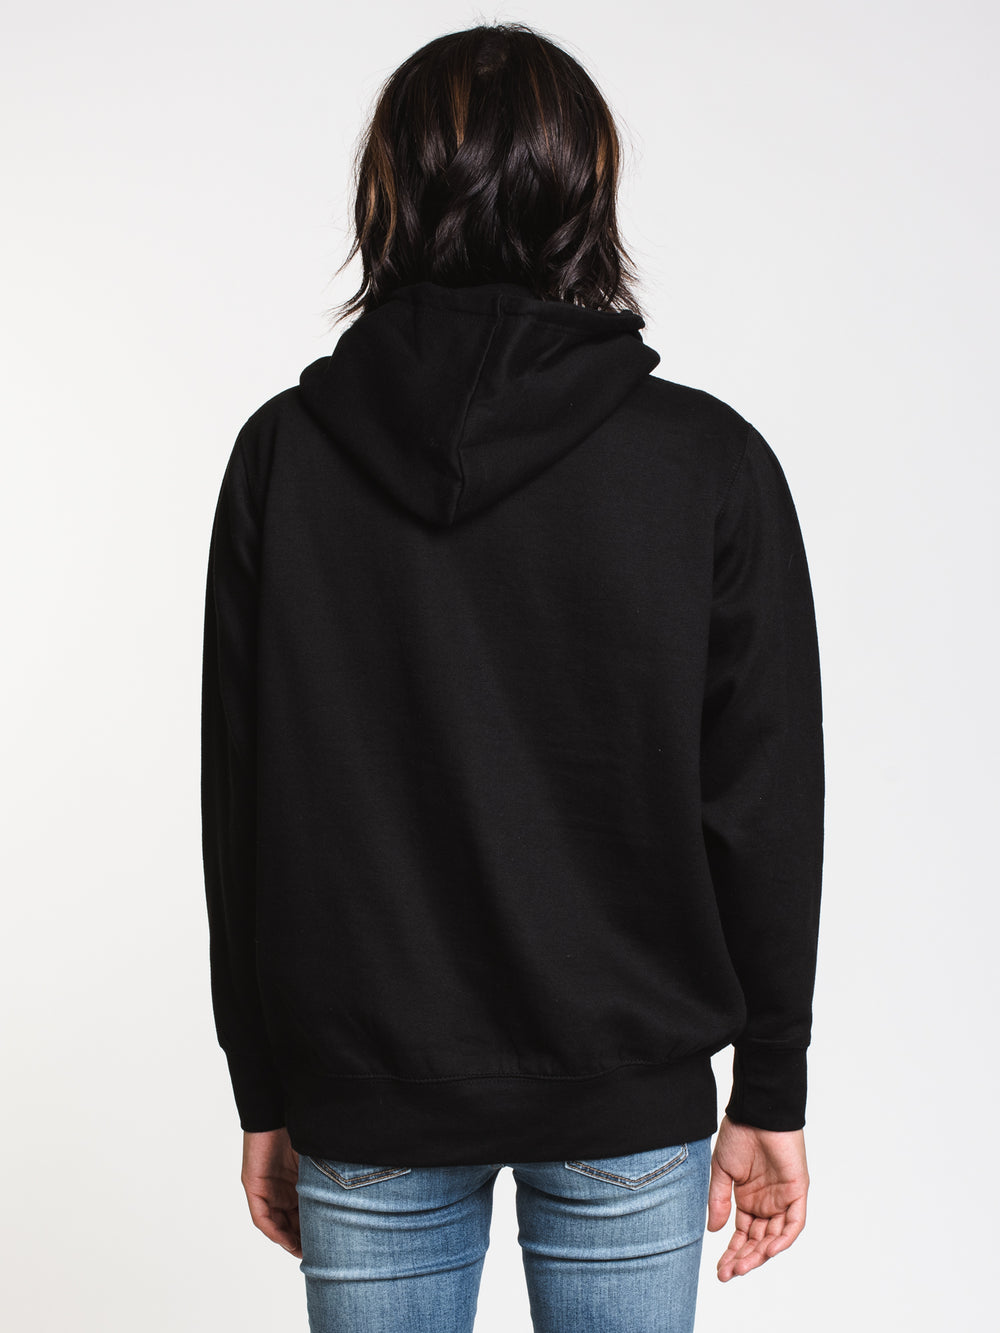 CROOKS & CASTLES ROSES CORE LOGO PULLOVER HOODIE  - CLEARANCE